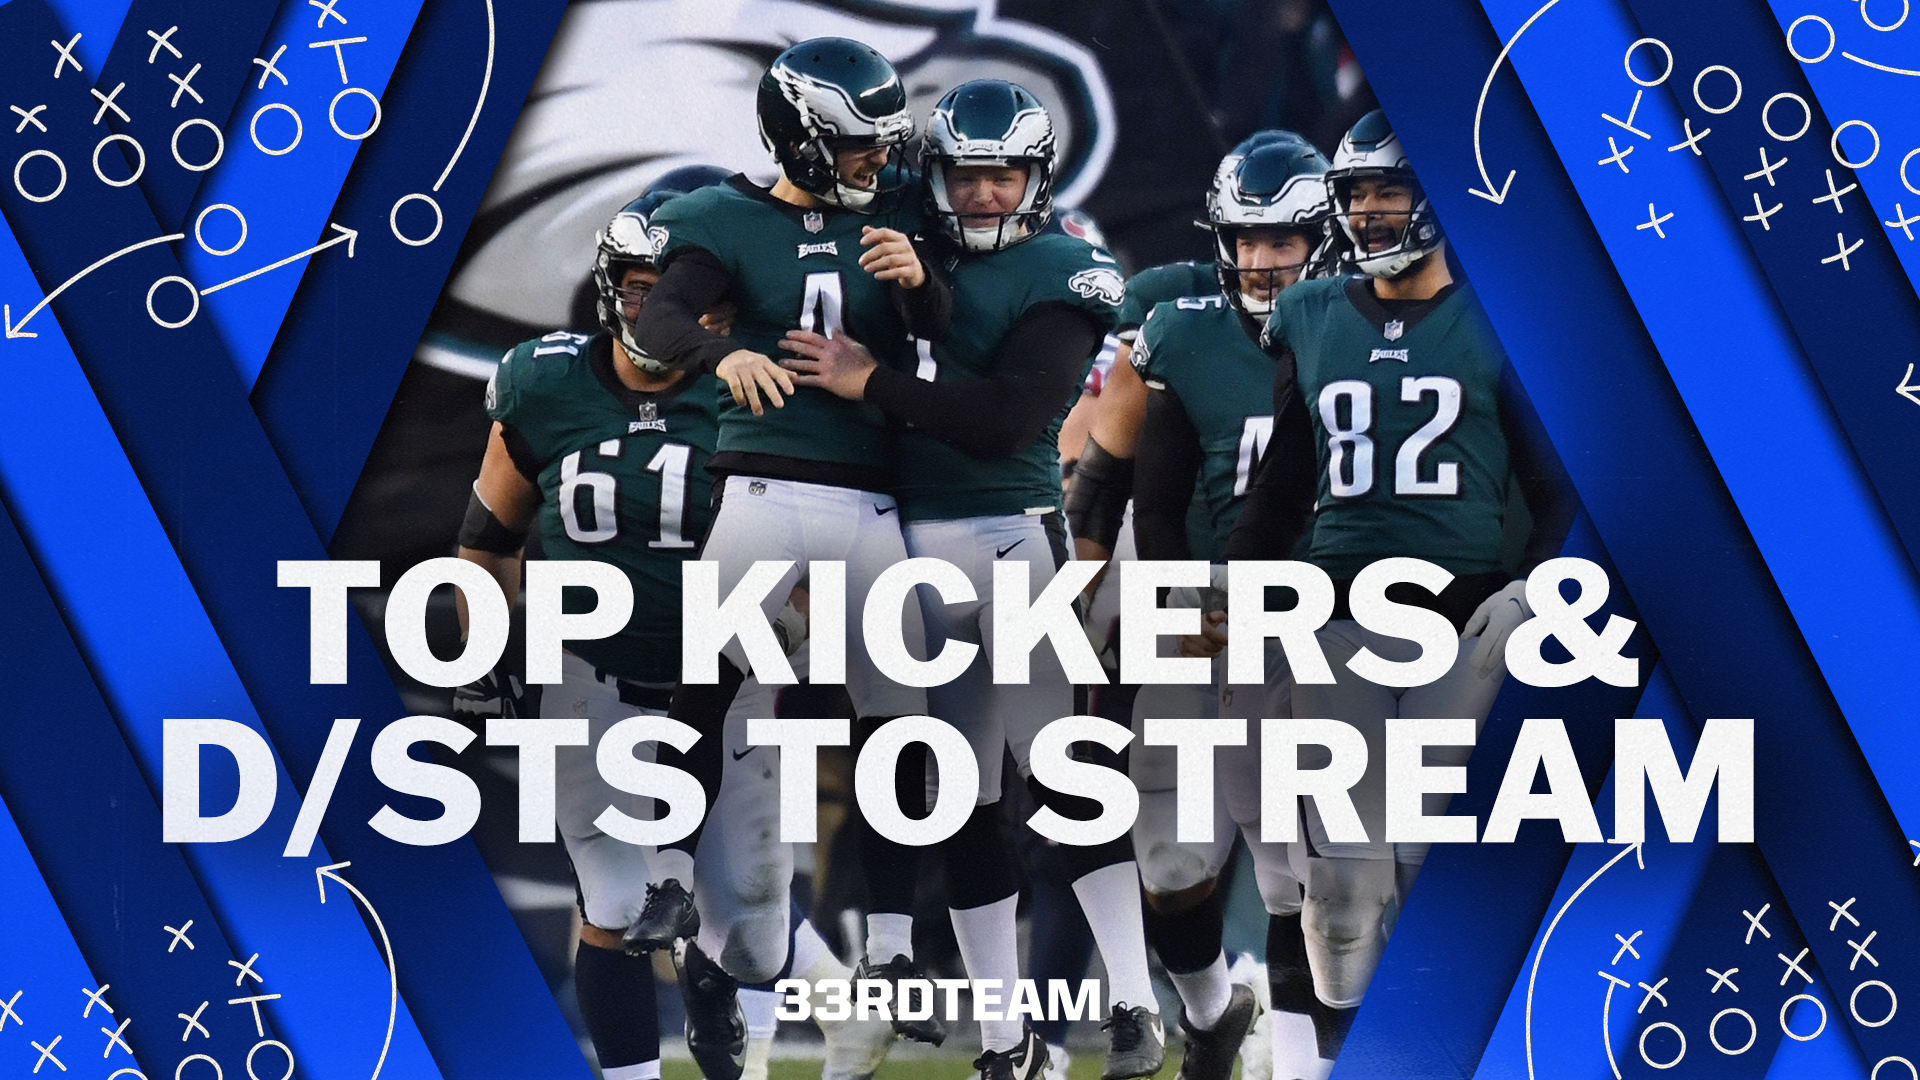 Top Kickers & D/STs to Streaming